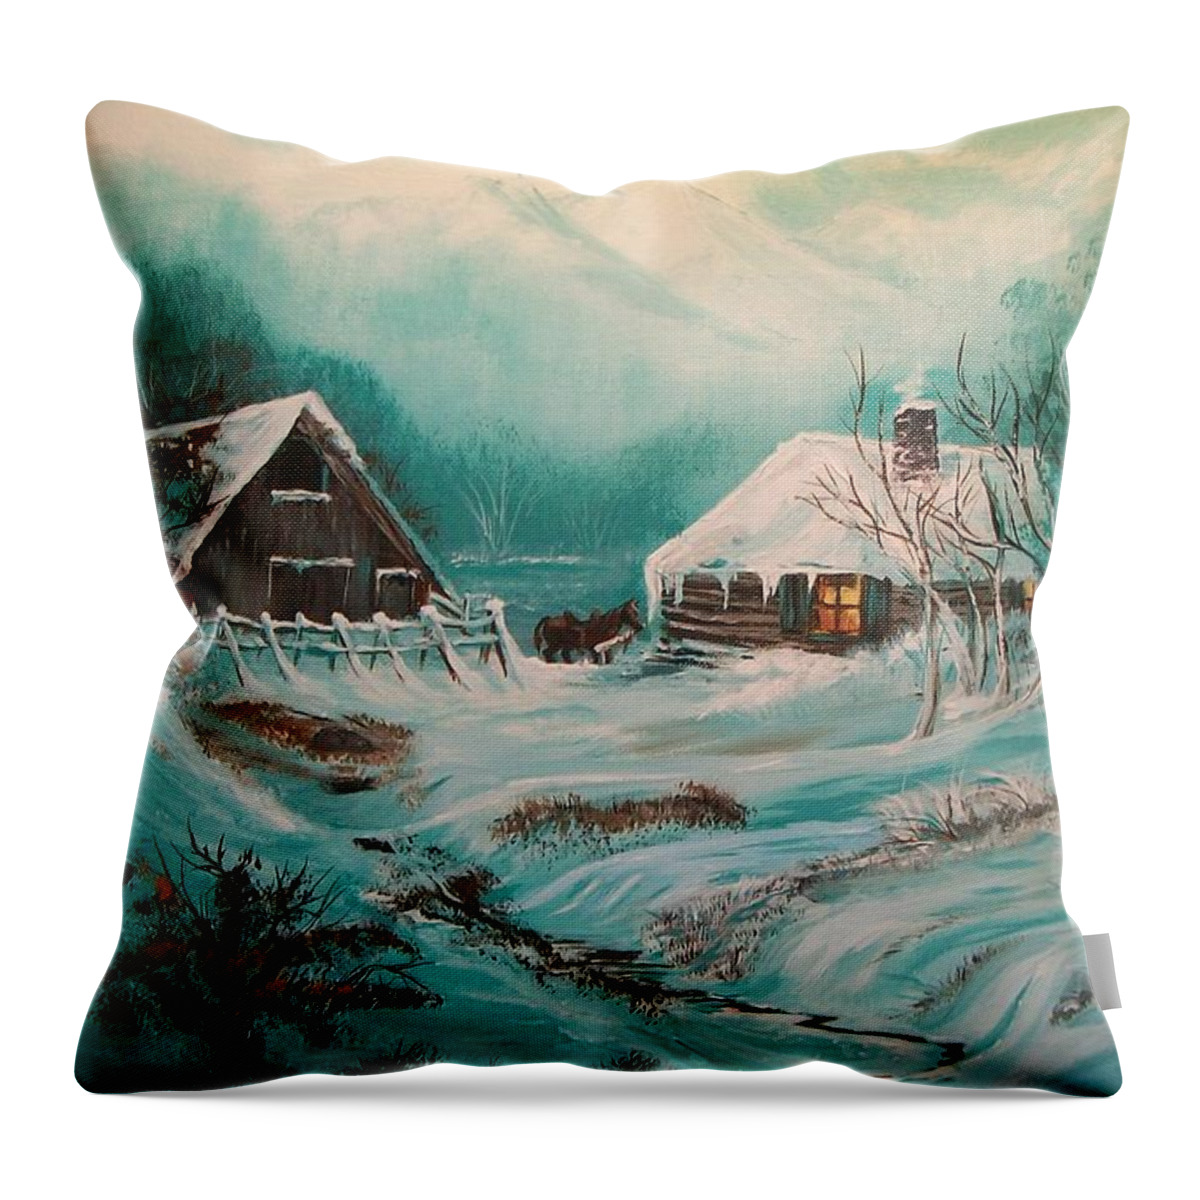 Log Throw Pillow featuring the painting Icy Twilight by Sharon Duguay